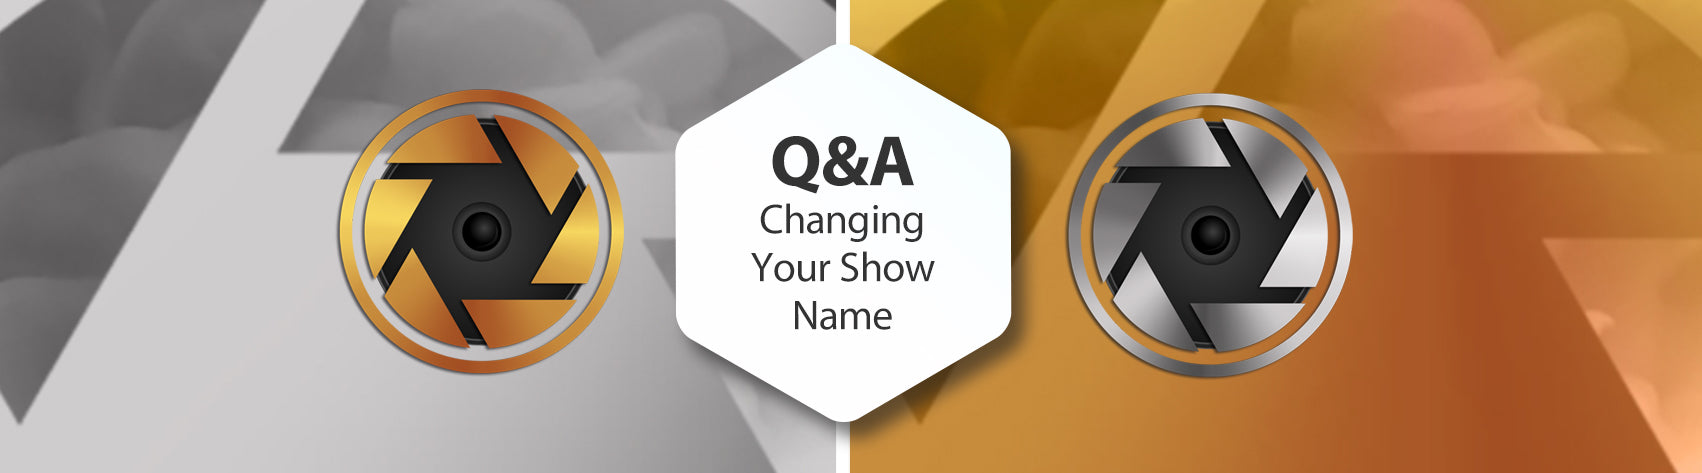 Q&A - Changing Your Show Name